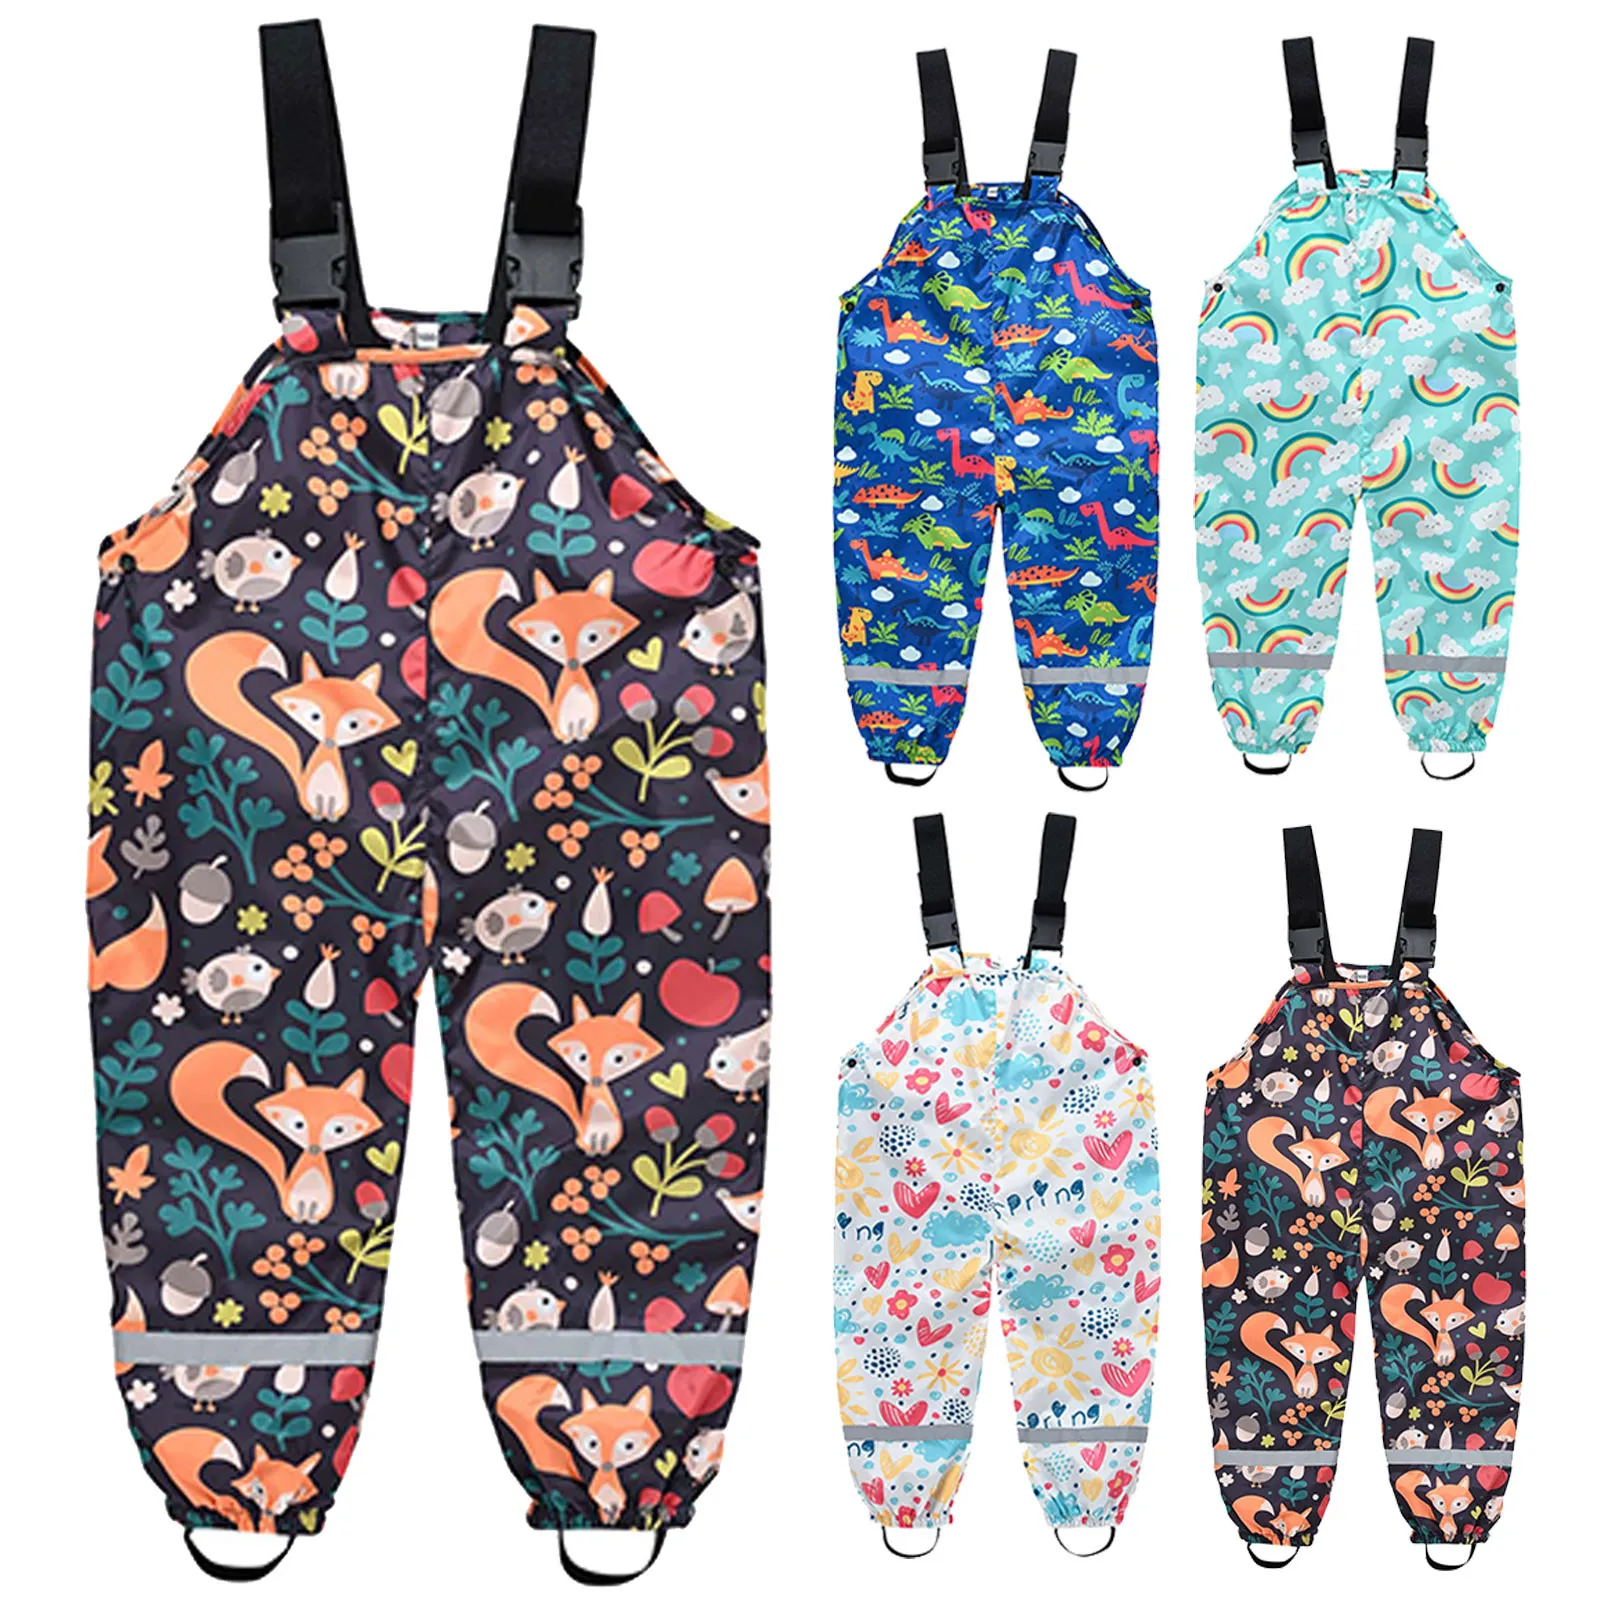 

Baby Rompers Childrens Clothes Baby Boys Clothes Girls Pants Kids Cartoon Sling Rain Pants Overalls Play Water Assault Pants New